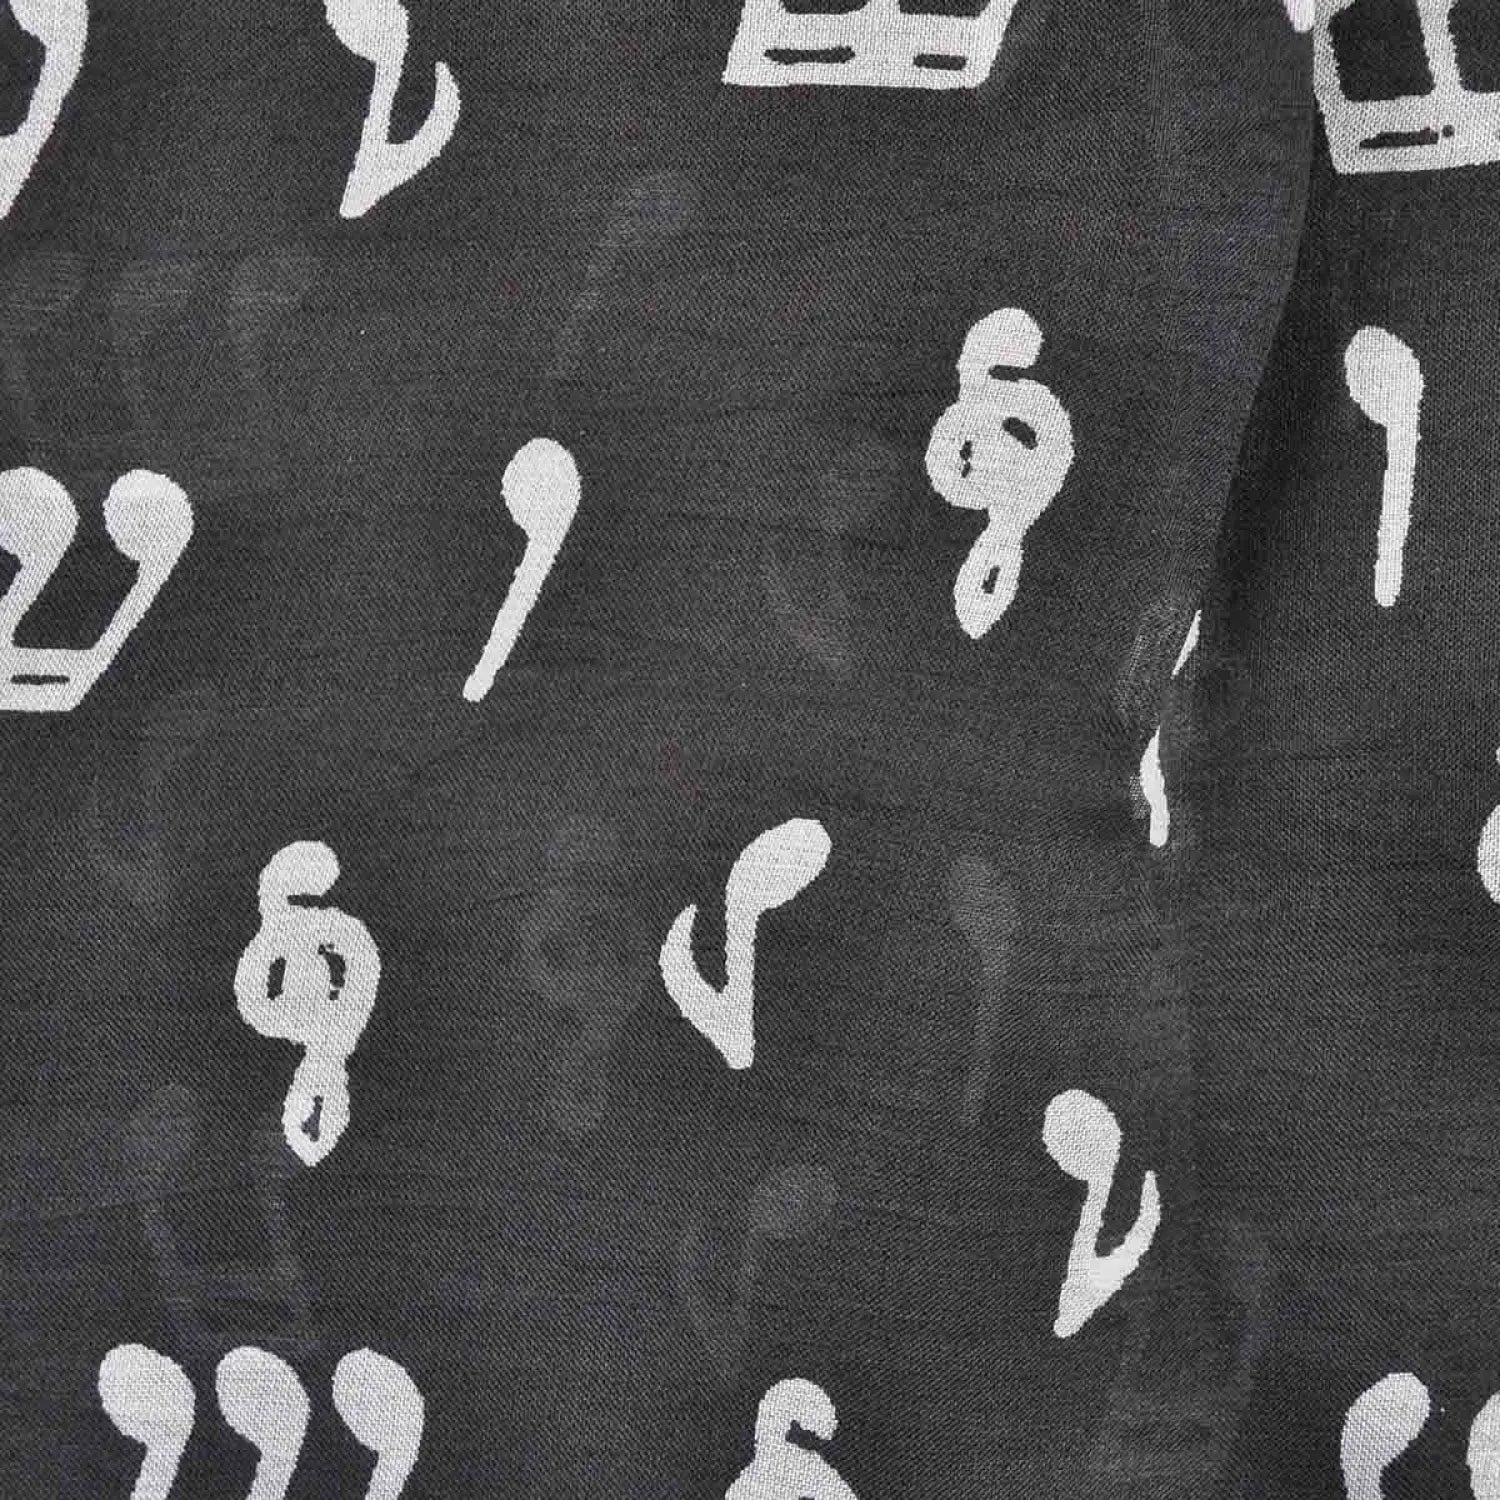 Black and white musical note pattern silk scarf with white letters